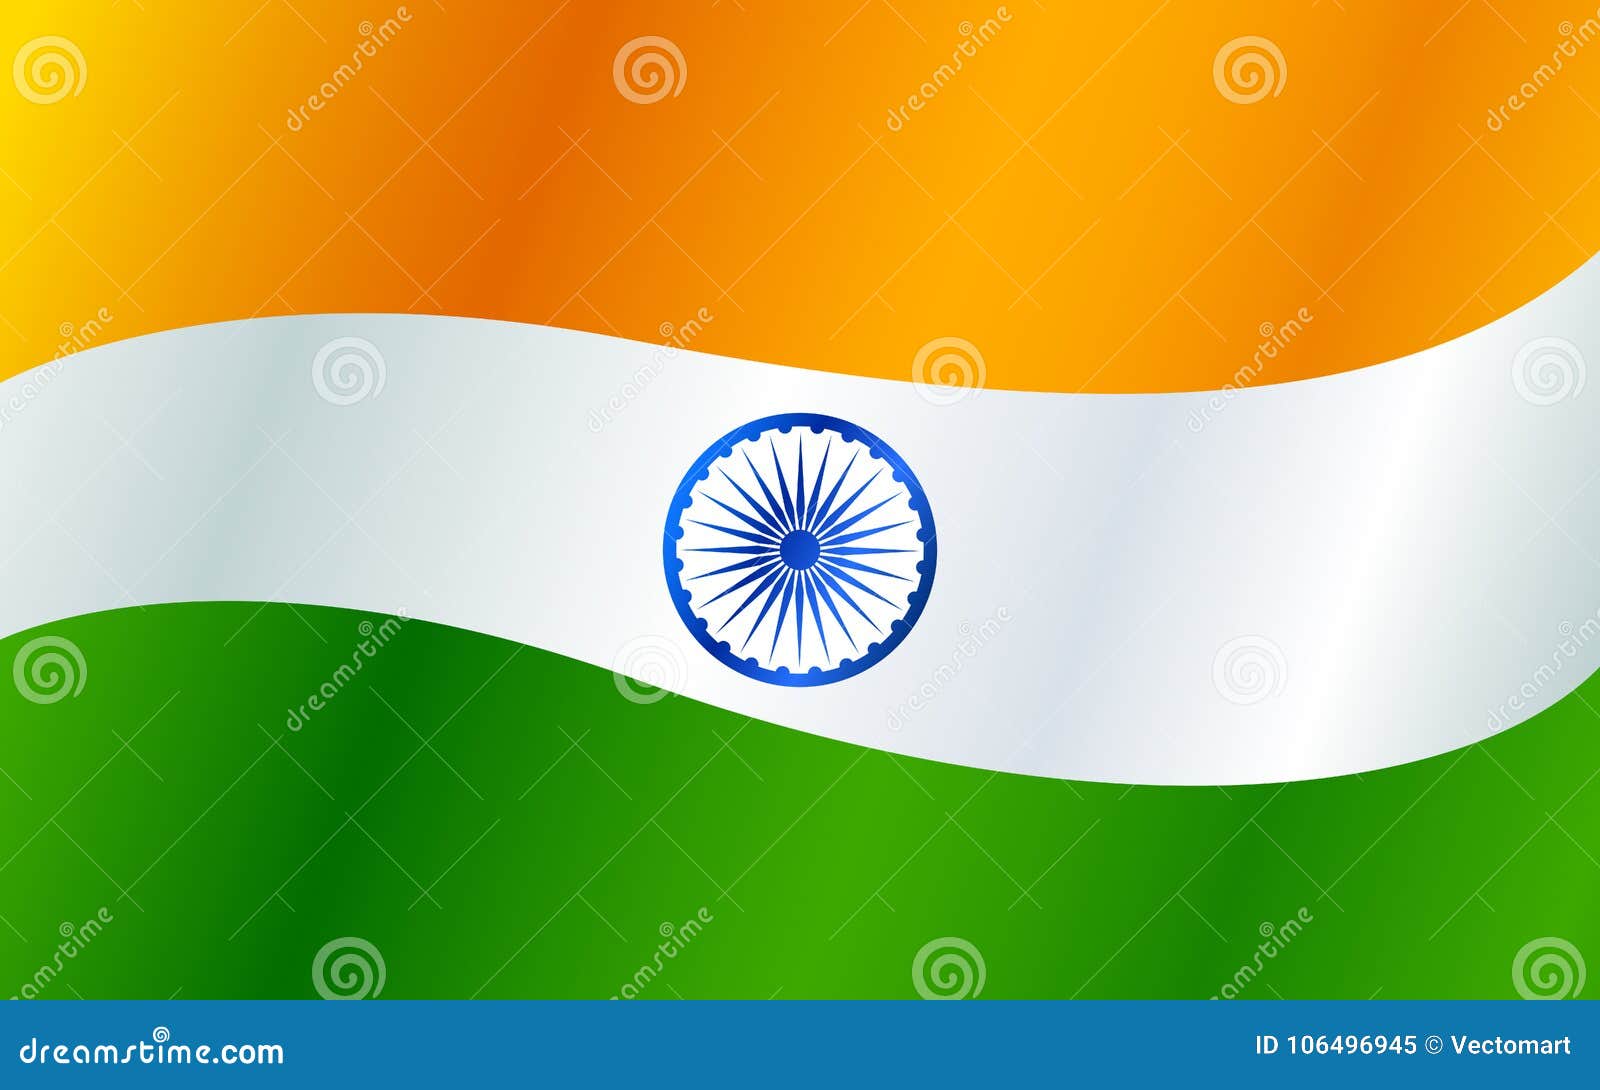 Tricolor Indian Flag Background for Republic and Independence Day of India  Stock Vector - Illustration of happy, decorative: 106496945